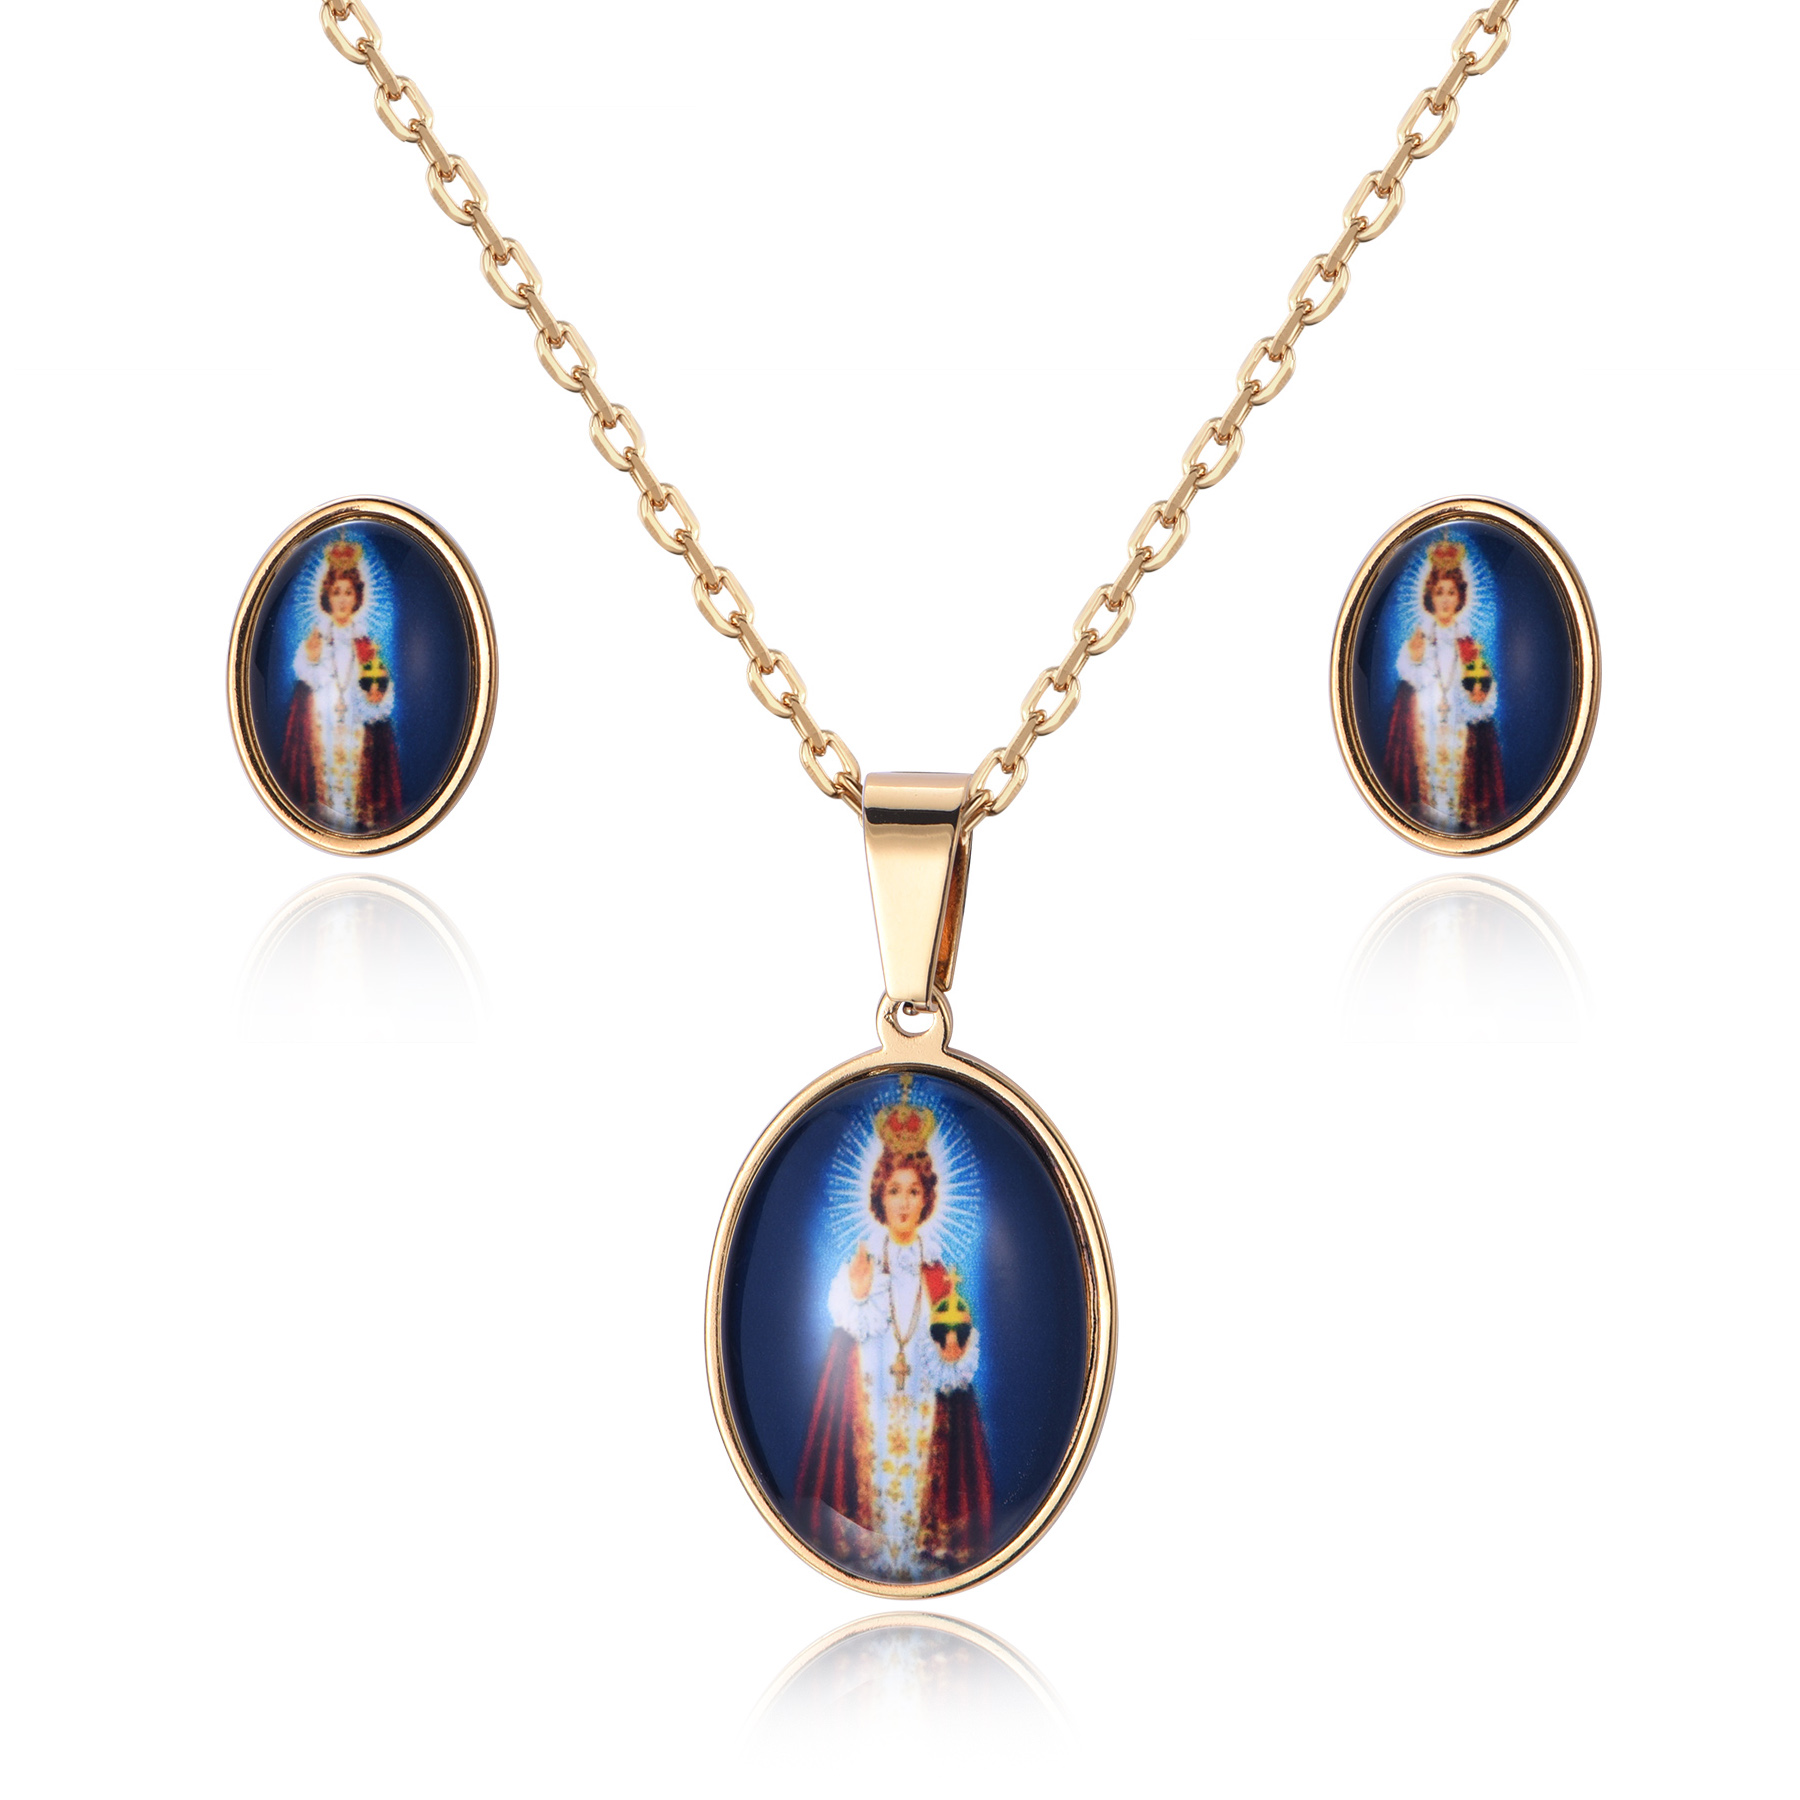 18K Gold Stainless Steel Epoxy Pictures Goddess Design Necklace Set Jewelry SJ-01